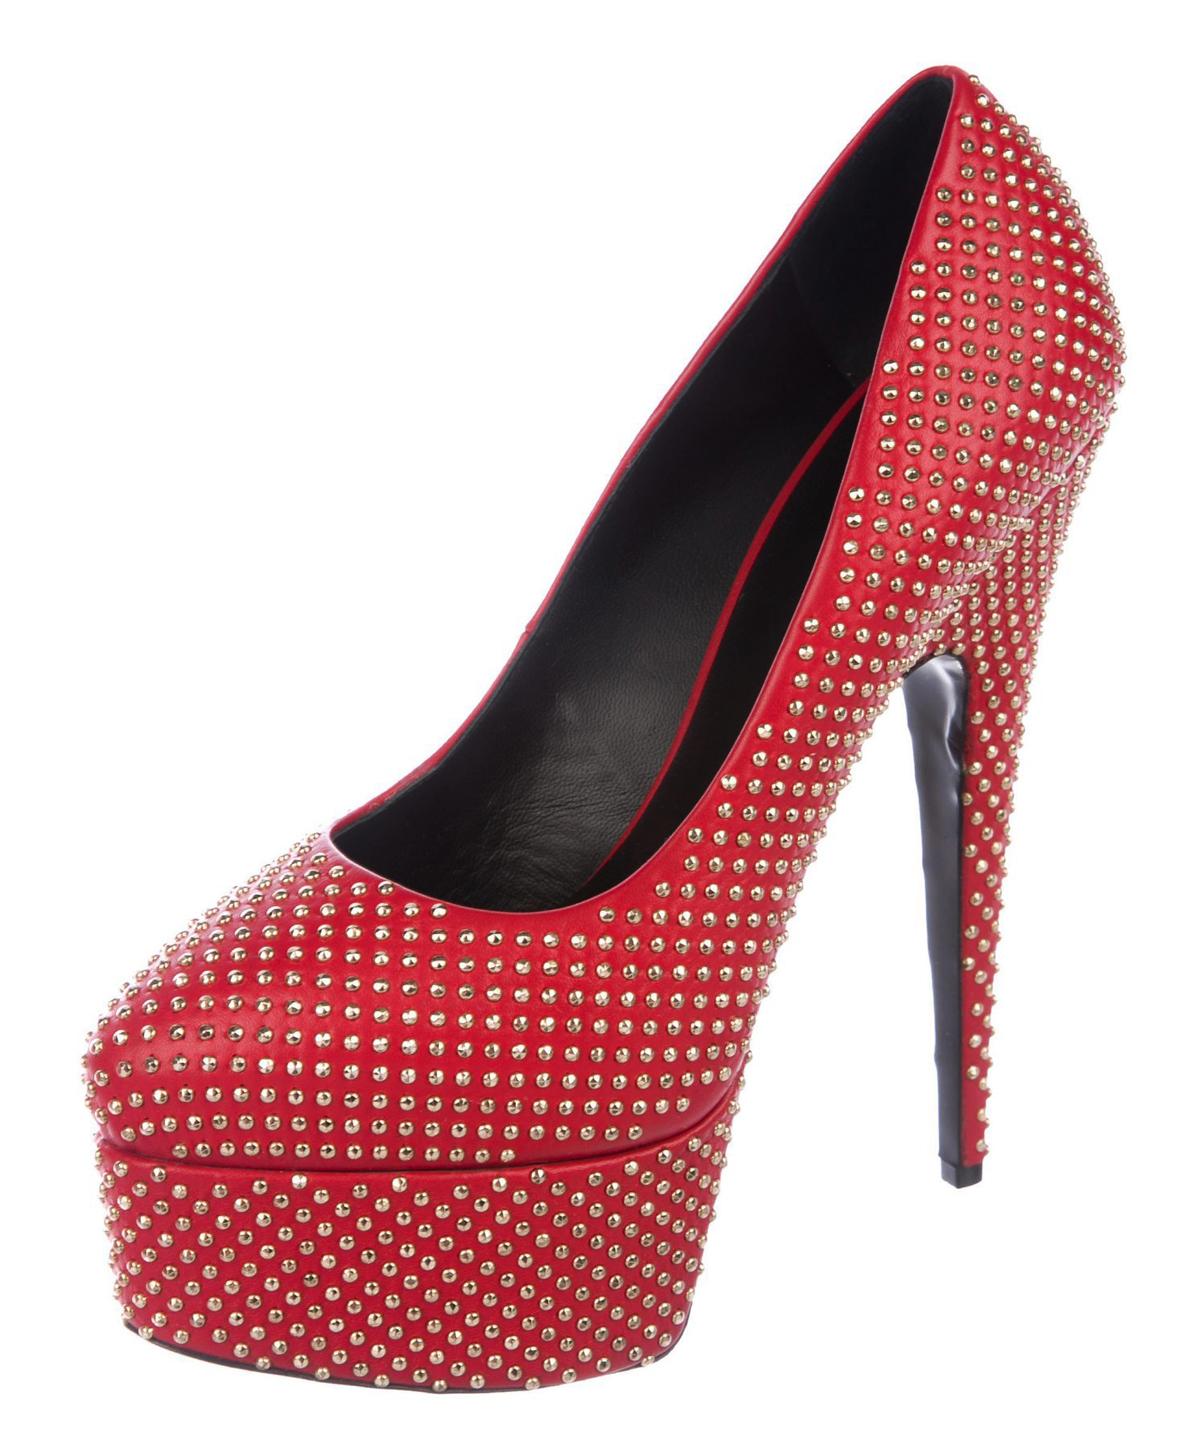 New Giuseppe Zanotti Leather Studded Platform Pumps
Designer size 40 - US 10 ( This brand typically runs a half size small ).
Red Leather, Gold-tone Stud Embellishment, Leather Insole and Sole.
Platform - 2 inches, High Heel - 7 inches.
Made n